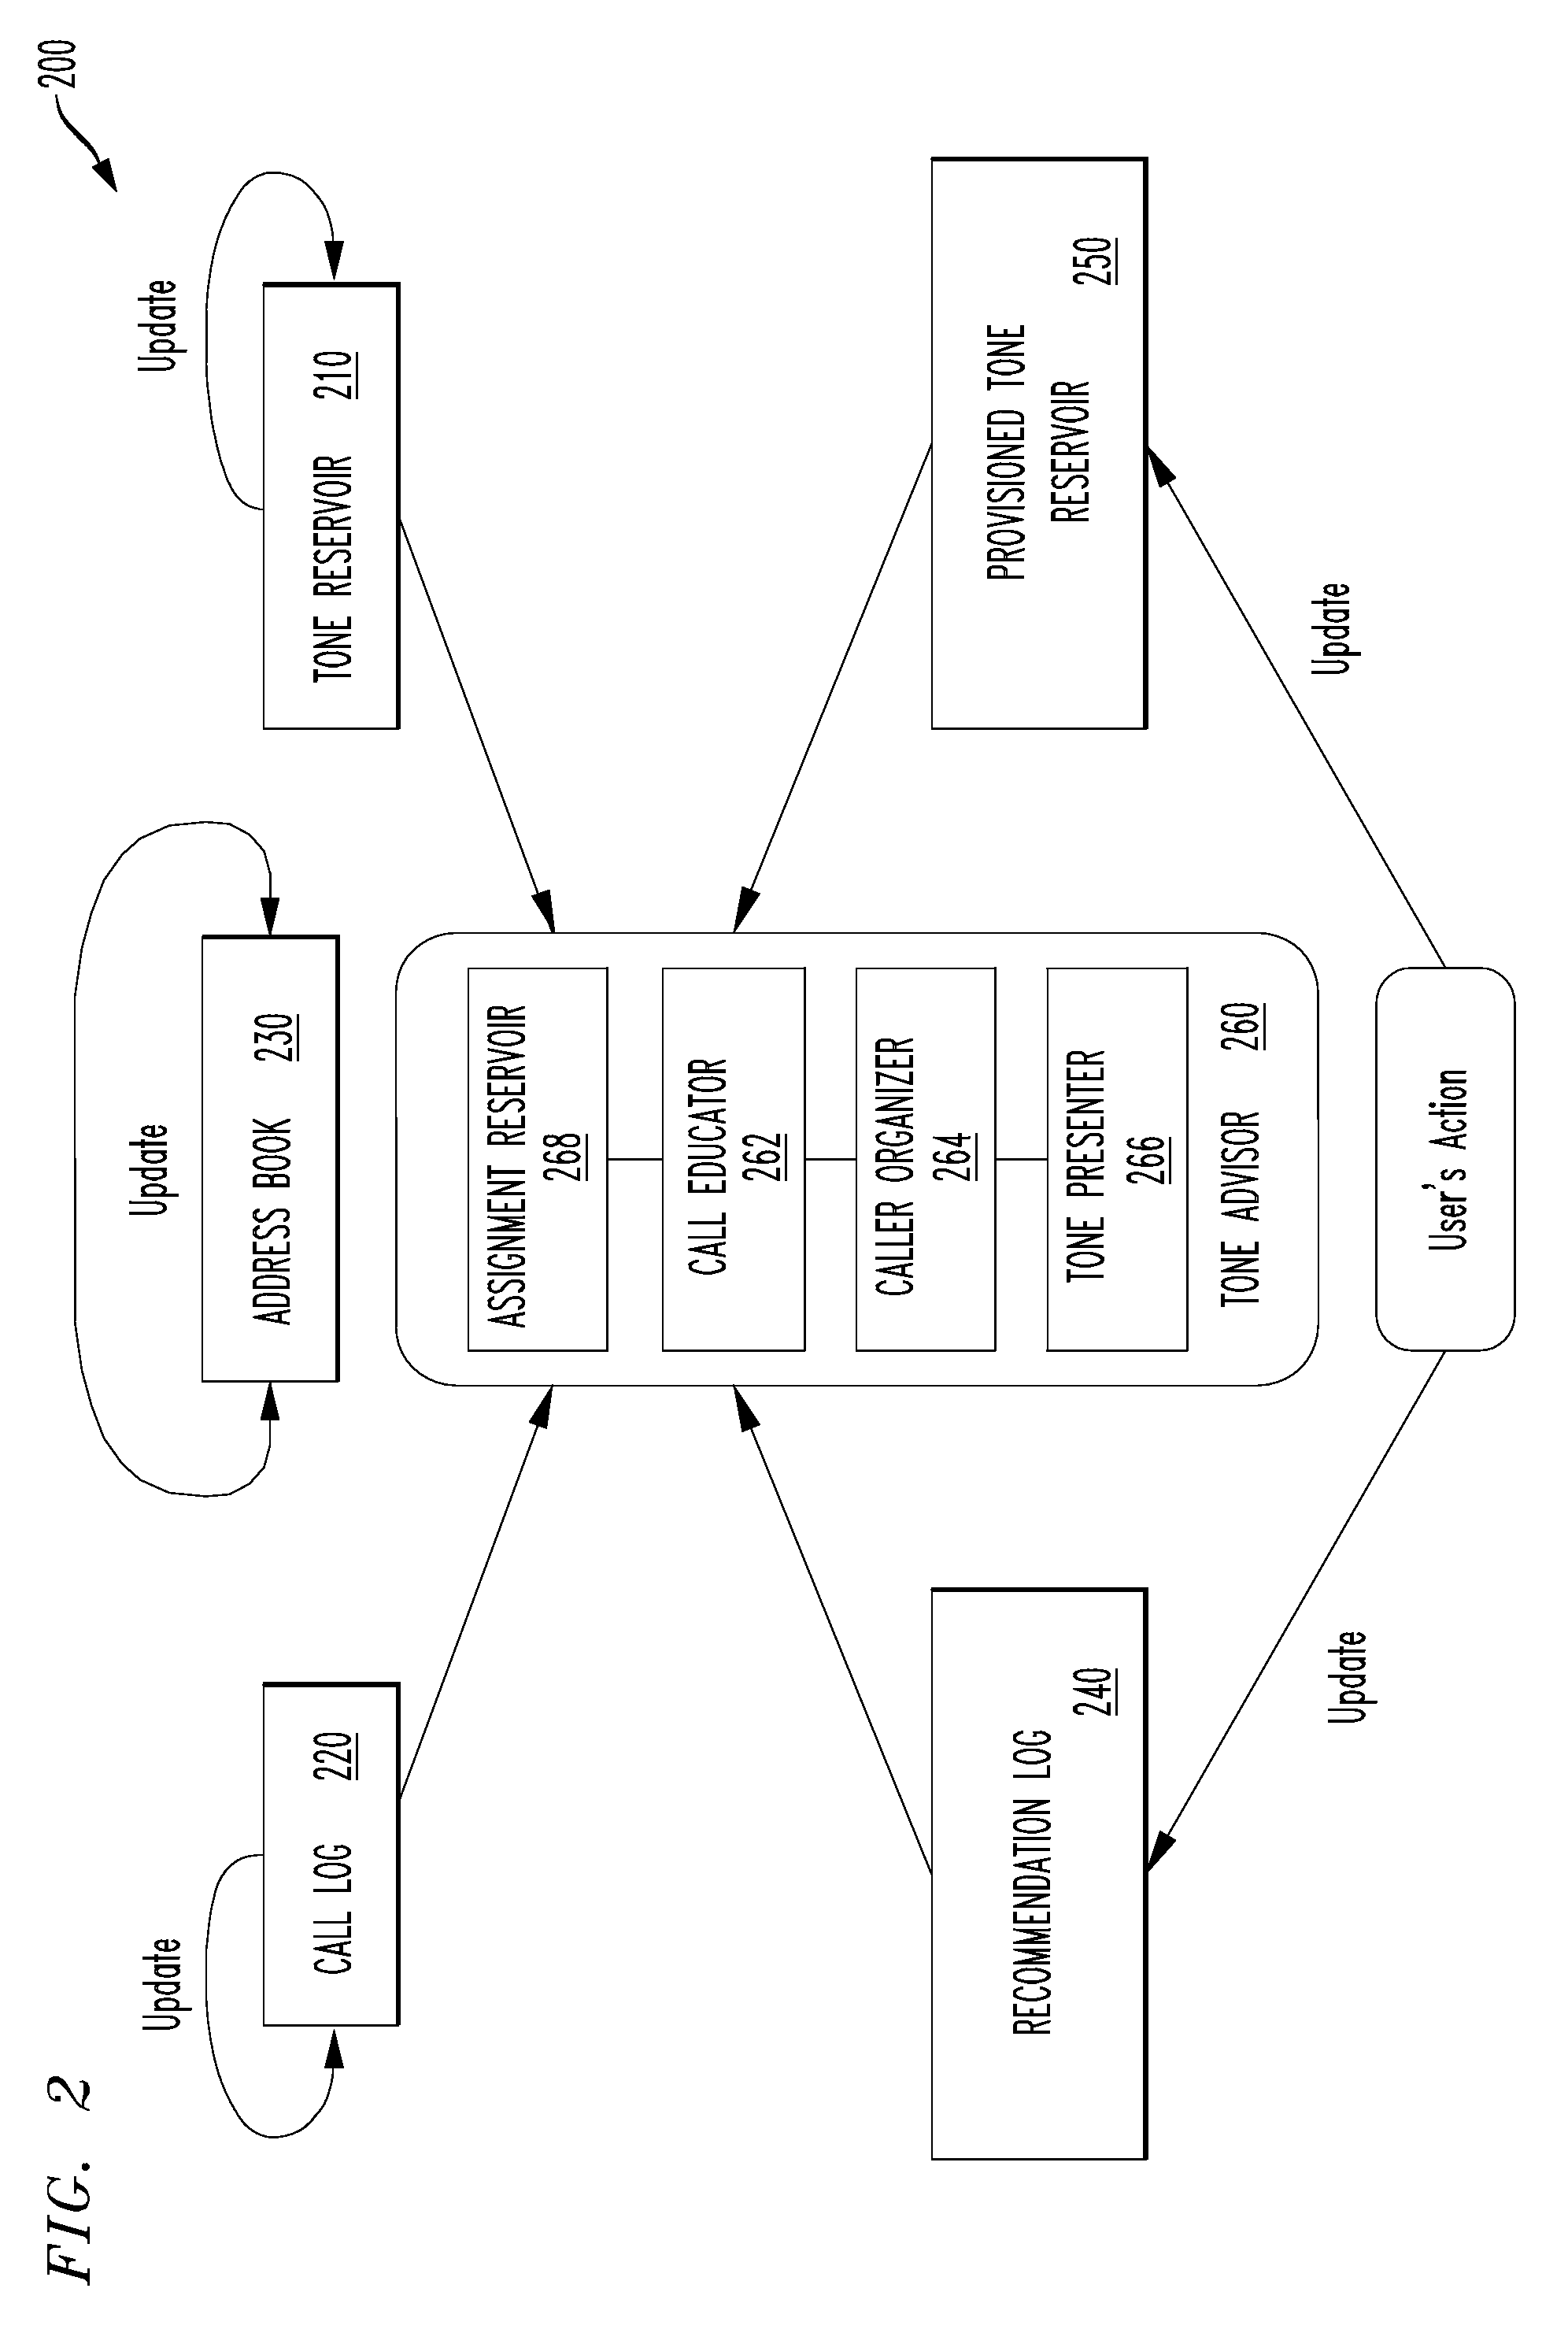 Tone advisor, a tone assisting system and a method of associating tones with callers